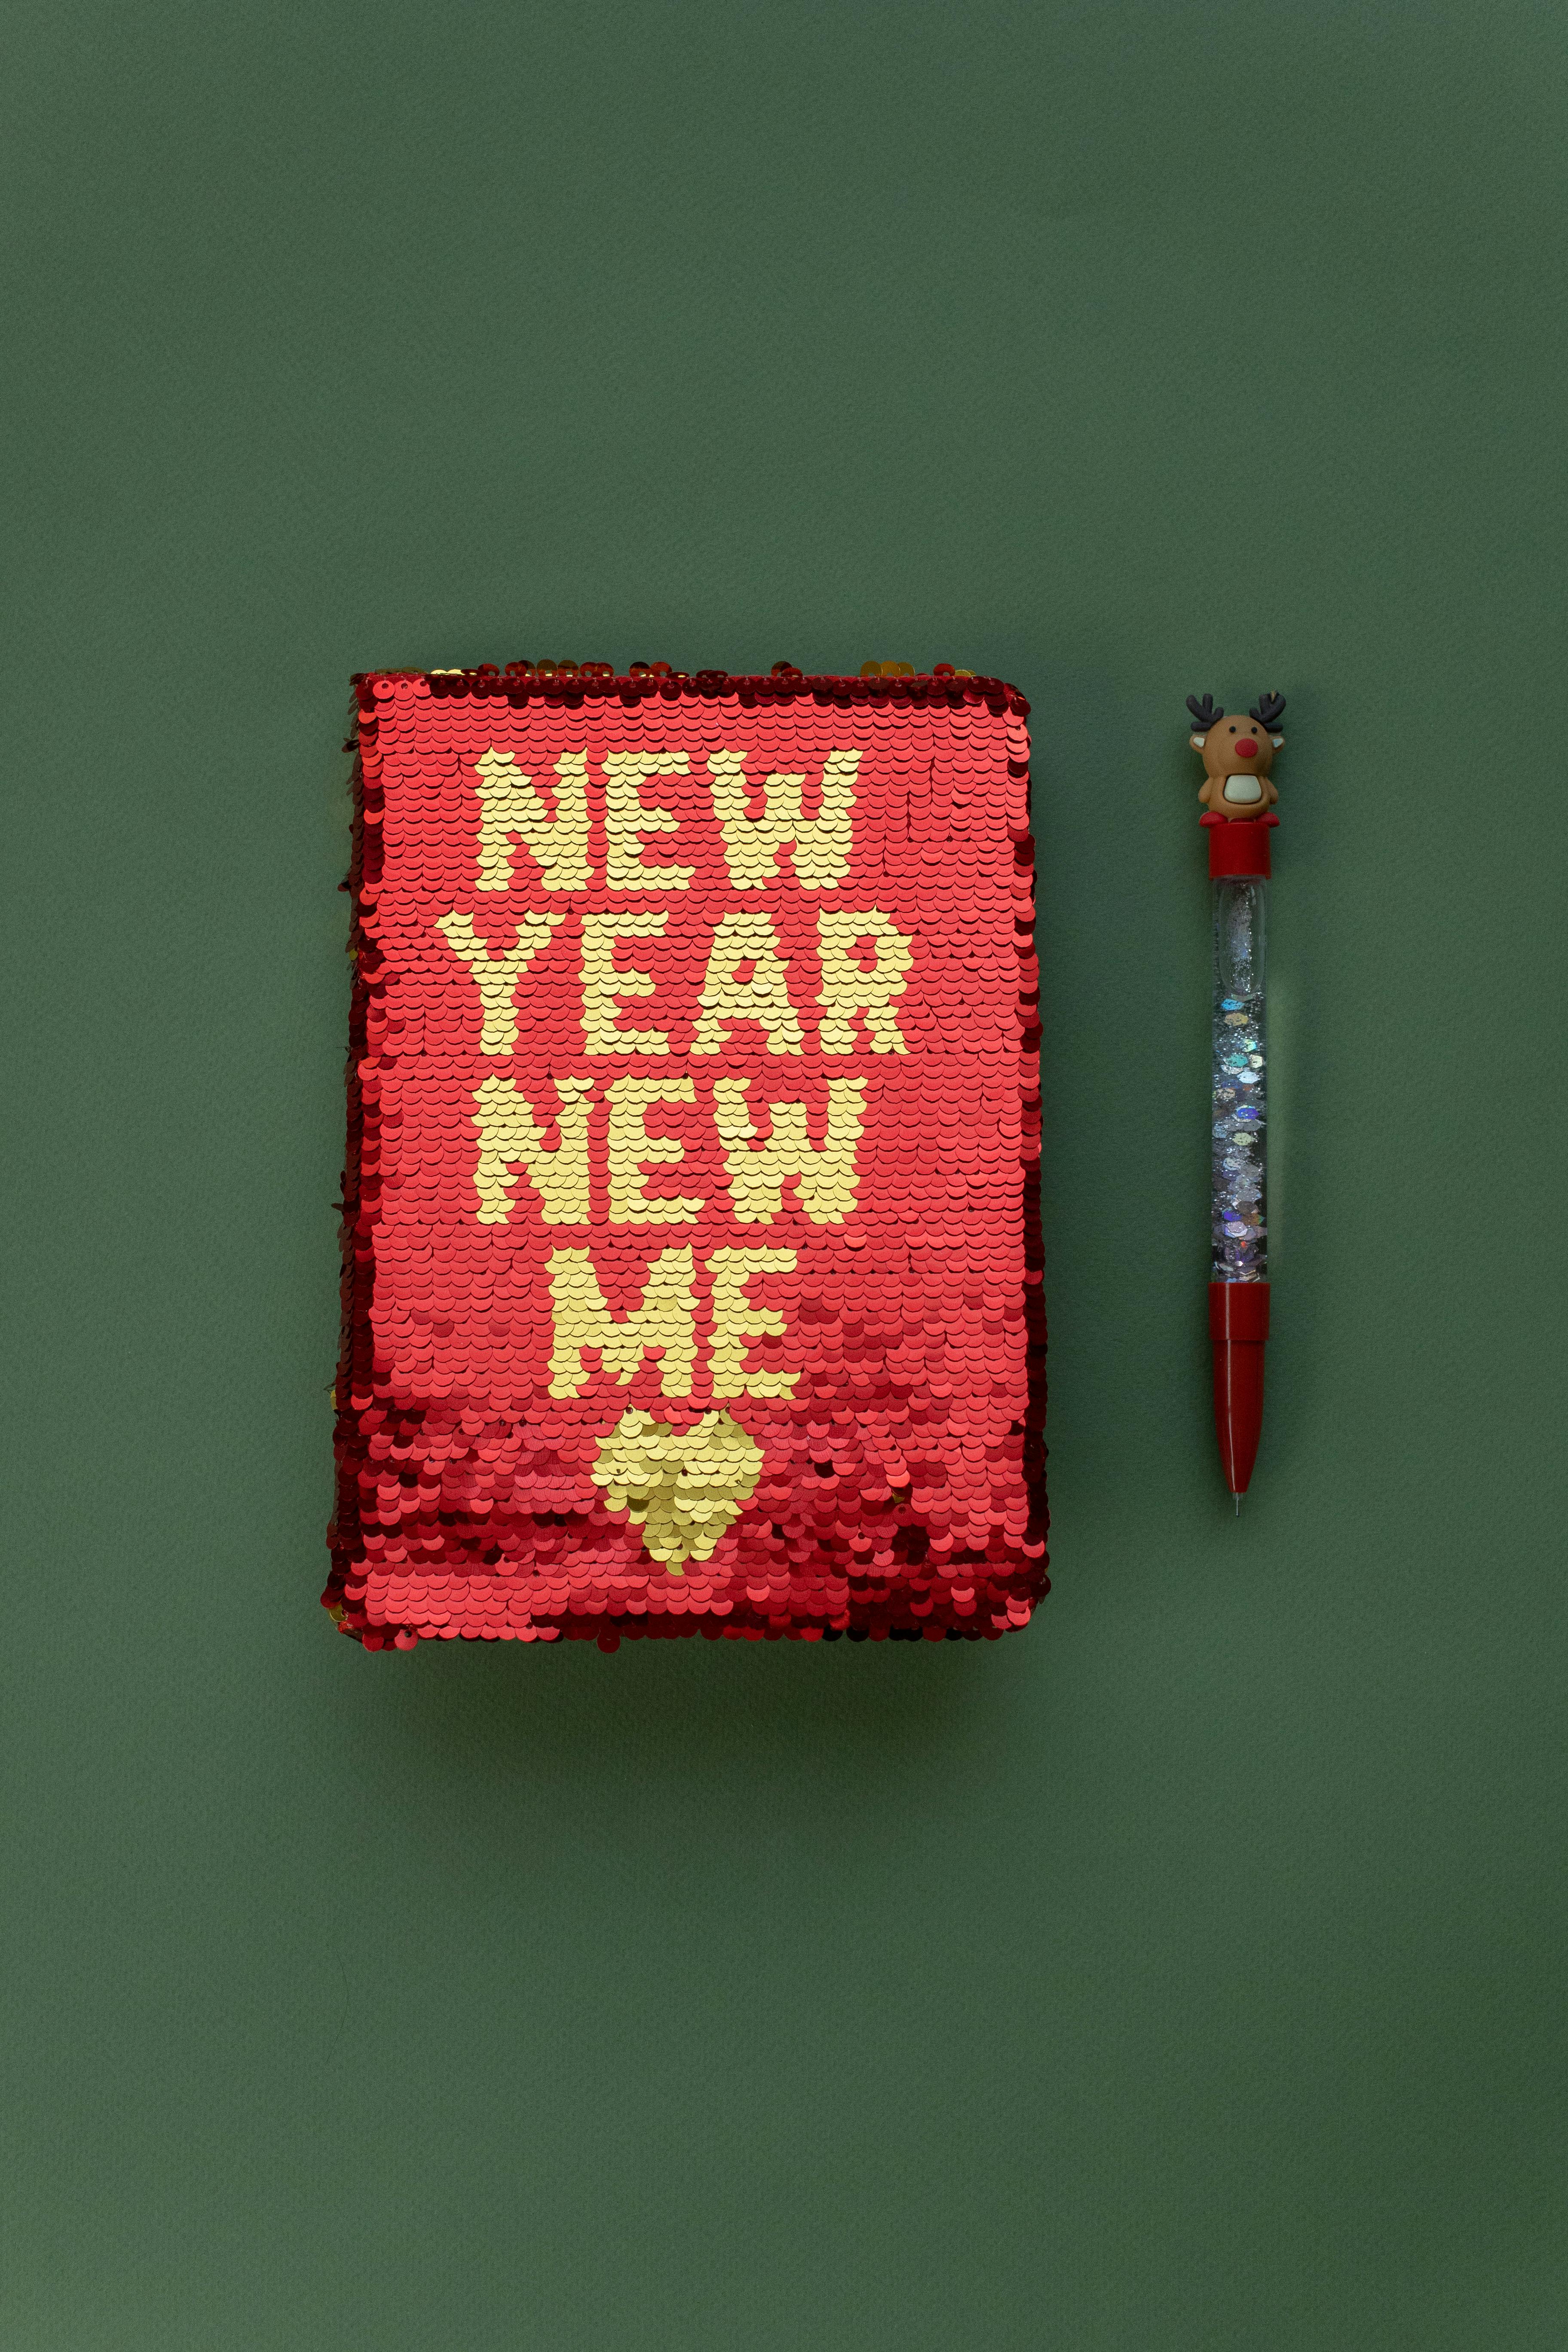 A notebook with a red sequined cover with writing  "NEW YEAR NEW ME" in yellow with a heart shaped drawing underneath the writing. The notebook is on a dark green background. To the right of the notebook, there's a pen decorated with a reindeer figure at the top, including antlers and a red nose, which complements the festive theme. 